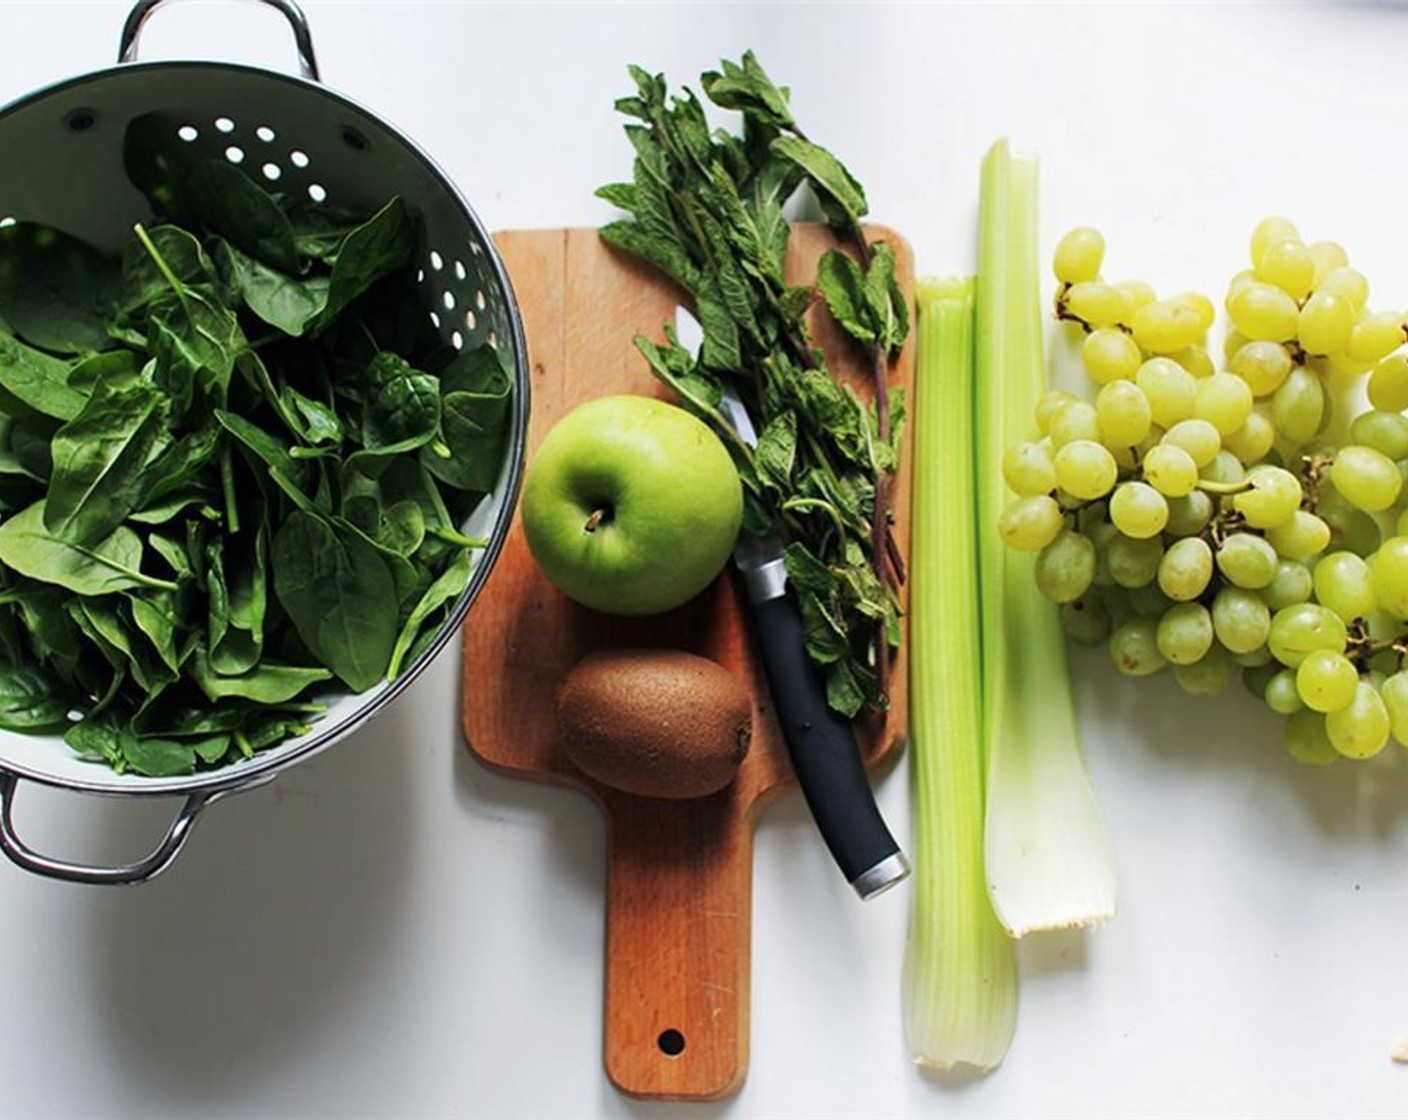 step 1 Cut the Celery (2 stalks) into chunks, the Green Apple (1) into pieces, and peel the Kiwifruit (1). Add cut ingredients, Fresh Mint (1 handful), Fresh Spinach (5.5 oz) and Grapes (1 pckg)  in a blender and whizz everything up!